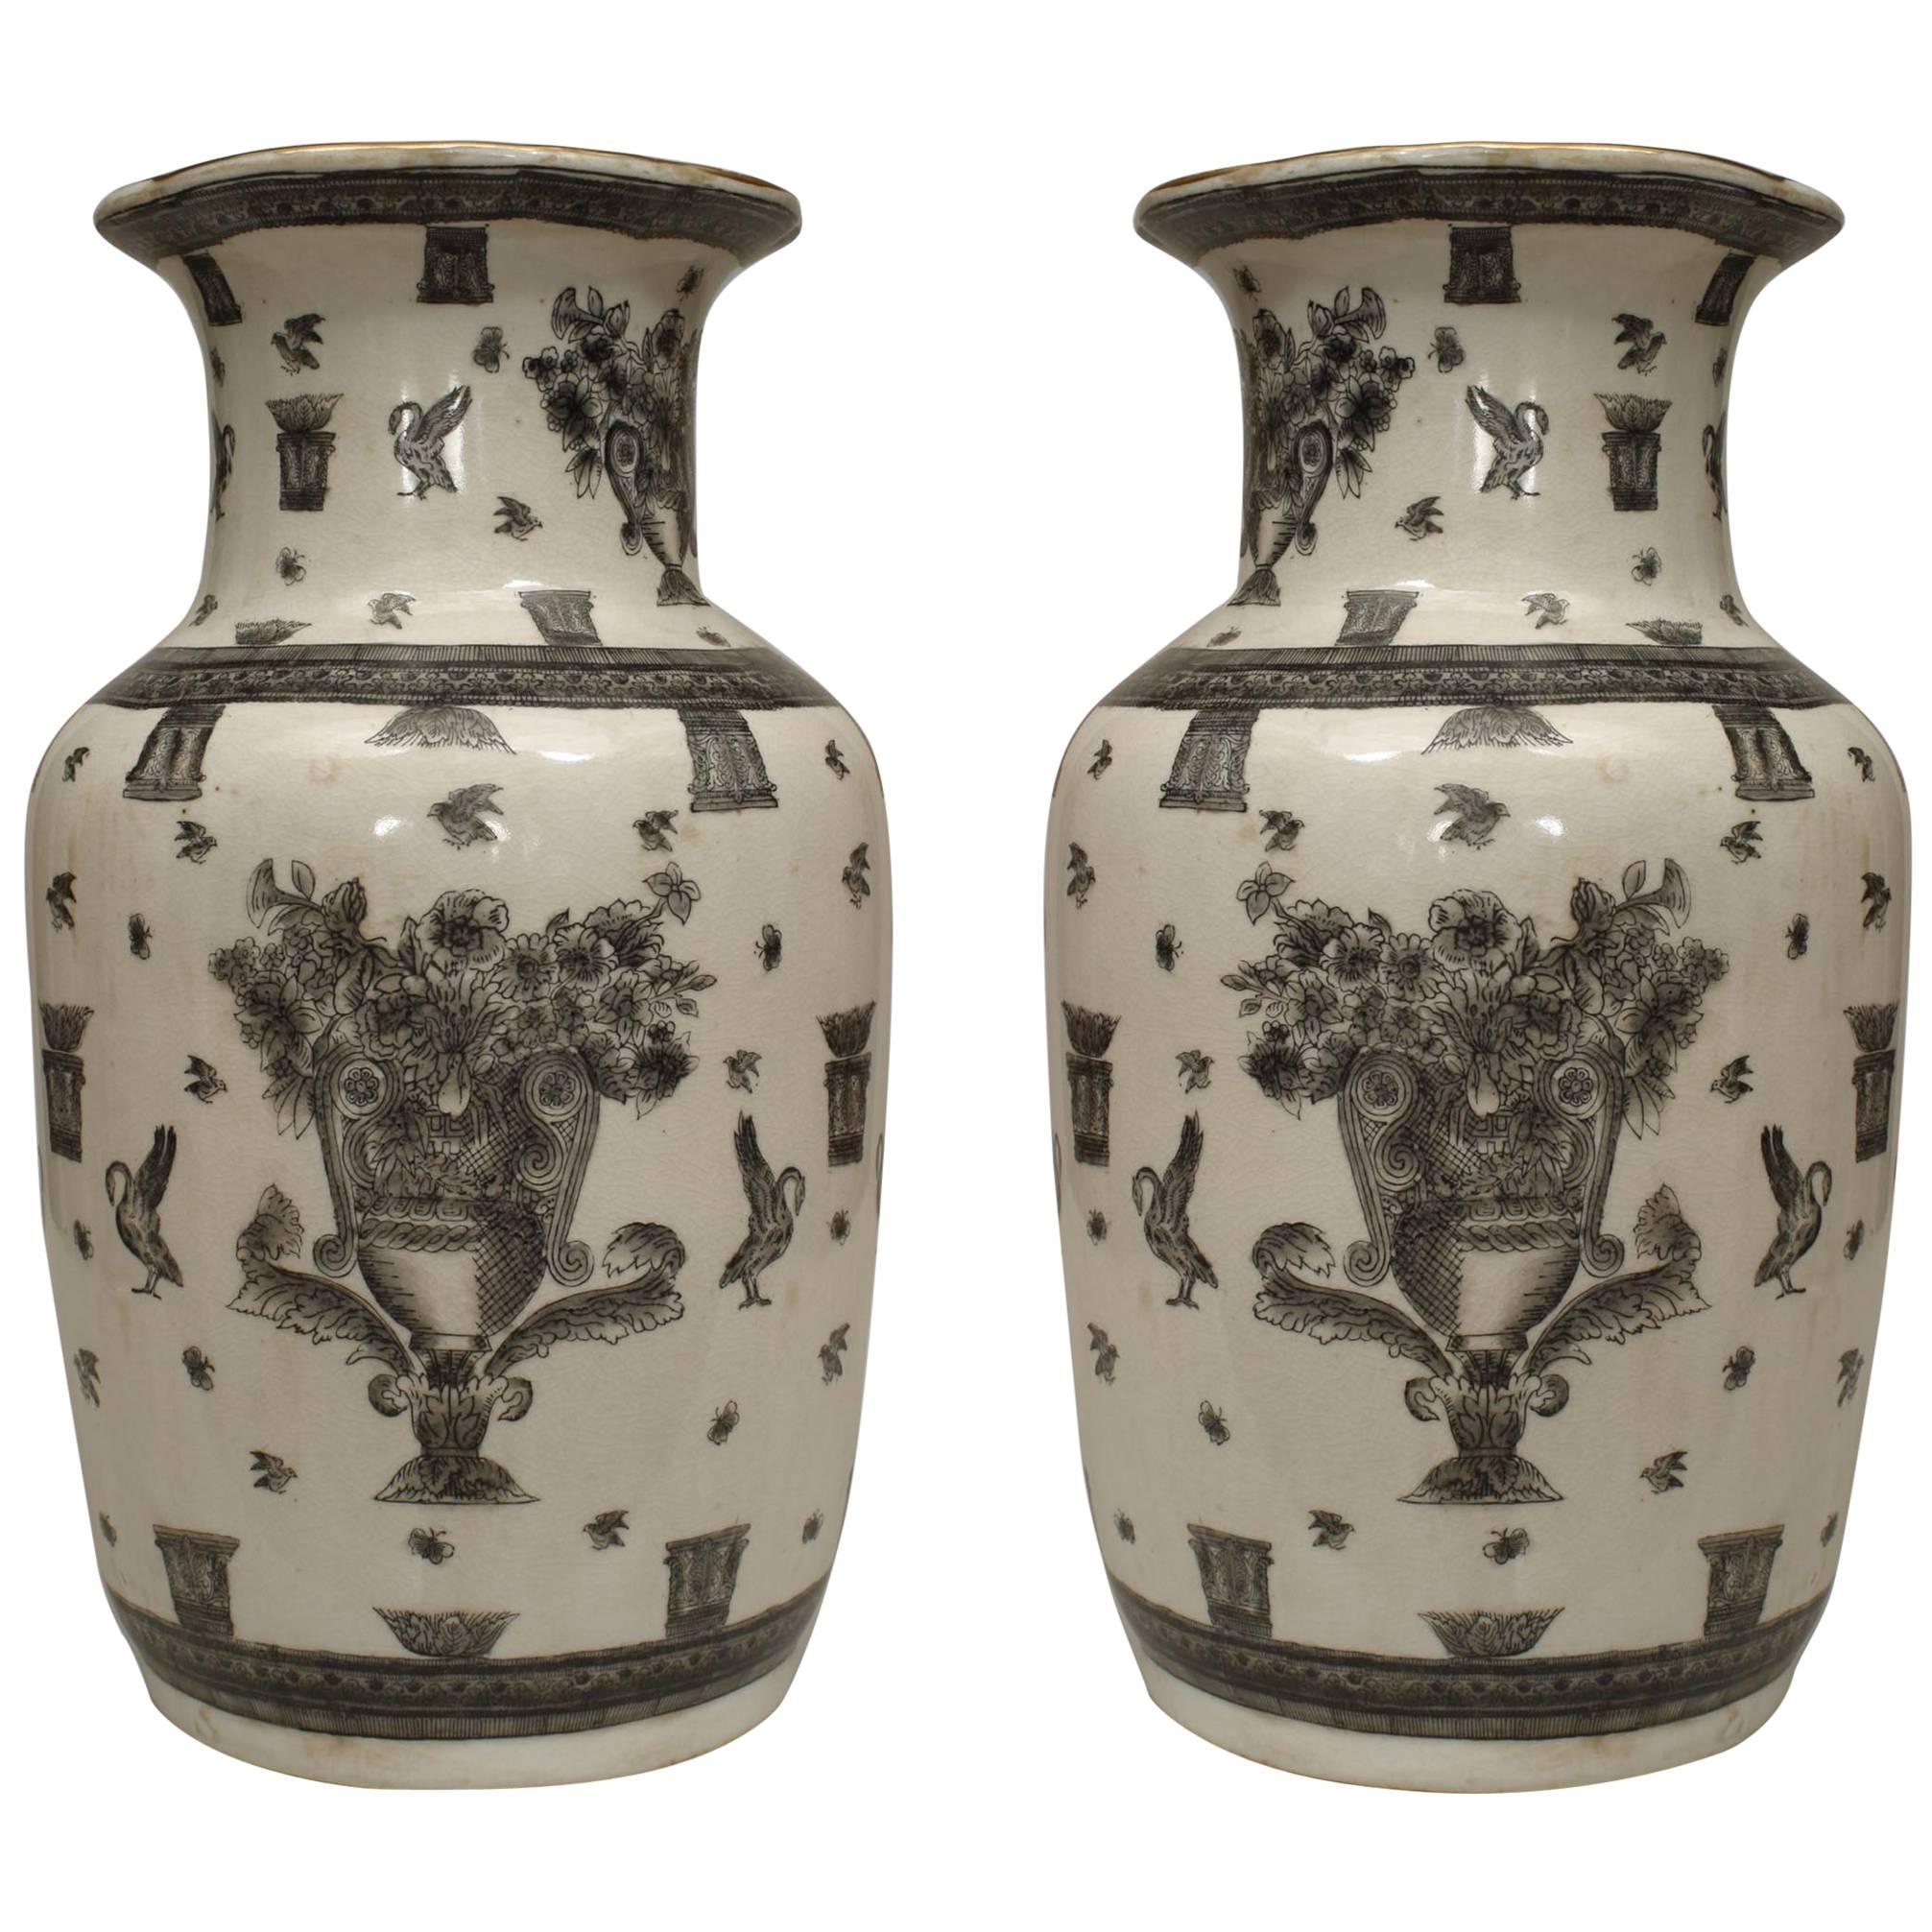 Pair of Chinese White and Black Porcelain Urns For Sale